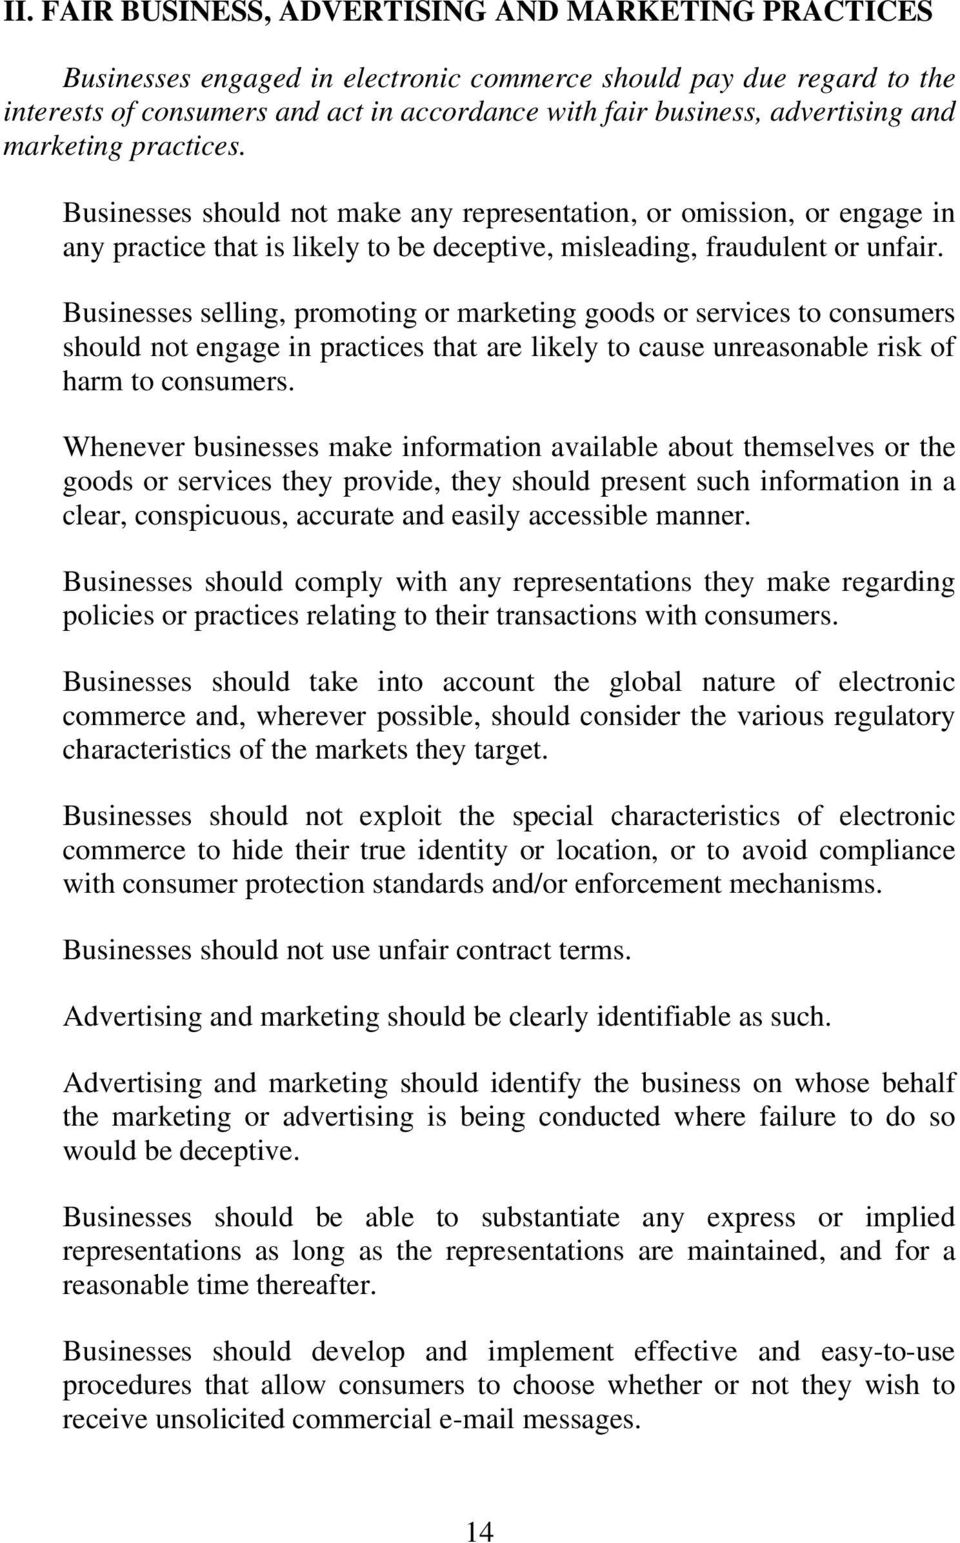 Businesses selling, promoting or marketing goods or services to consumers should not engage in practices that are likely to cause unreasonable risk of harm to consumers.